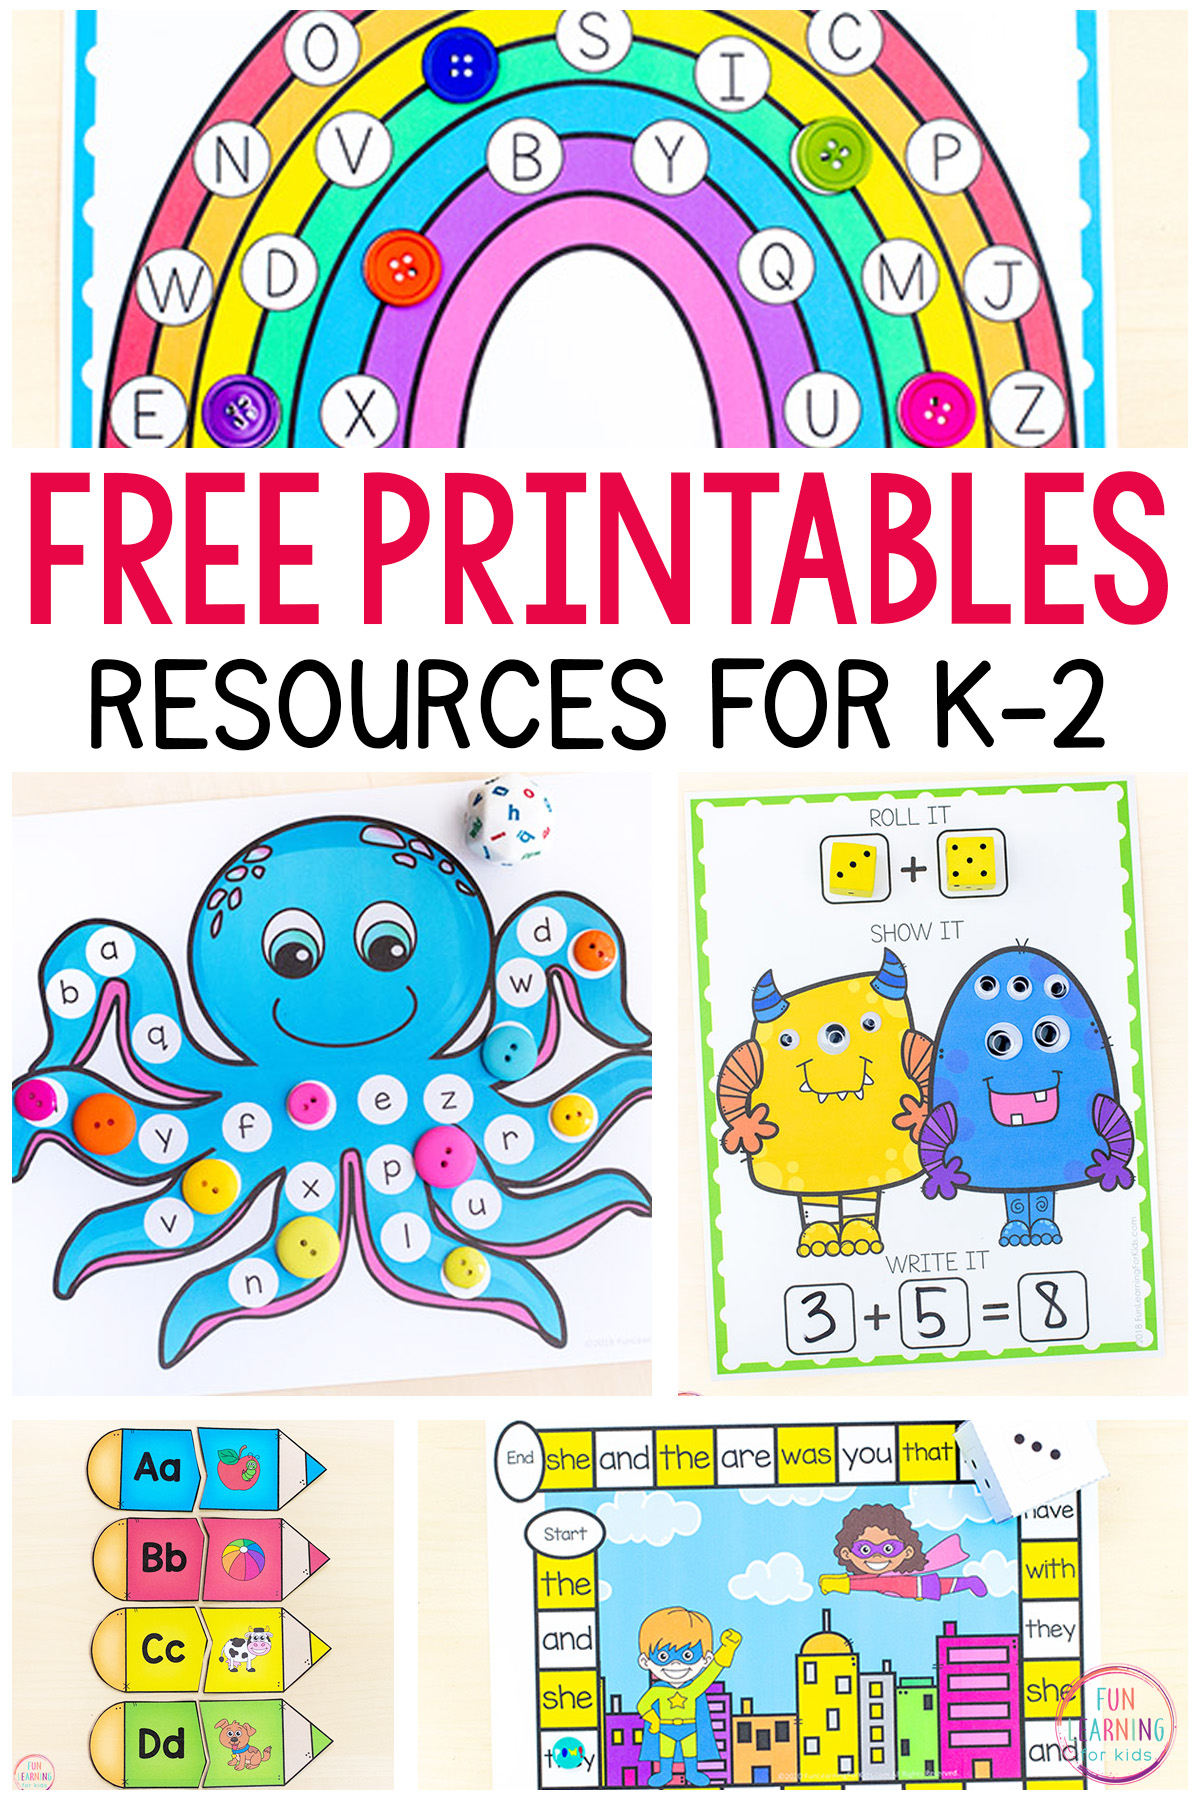 Worksheets to Print